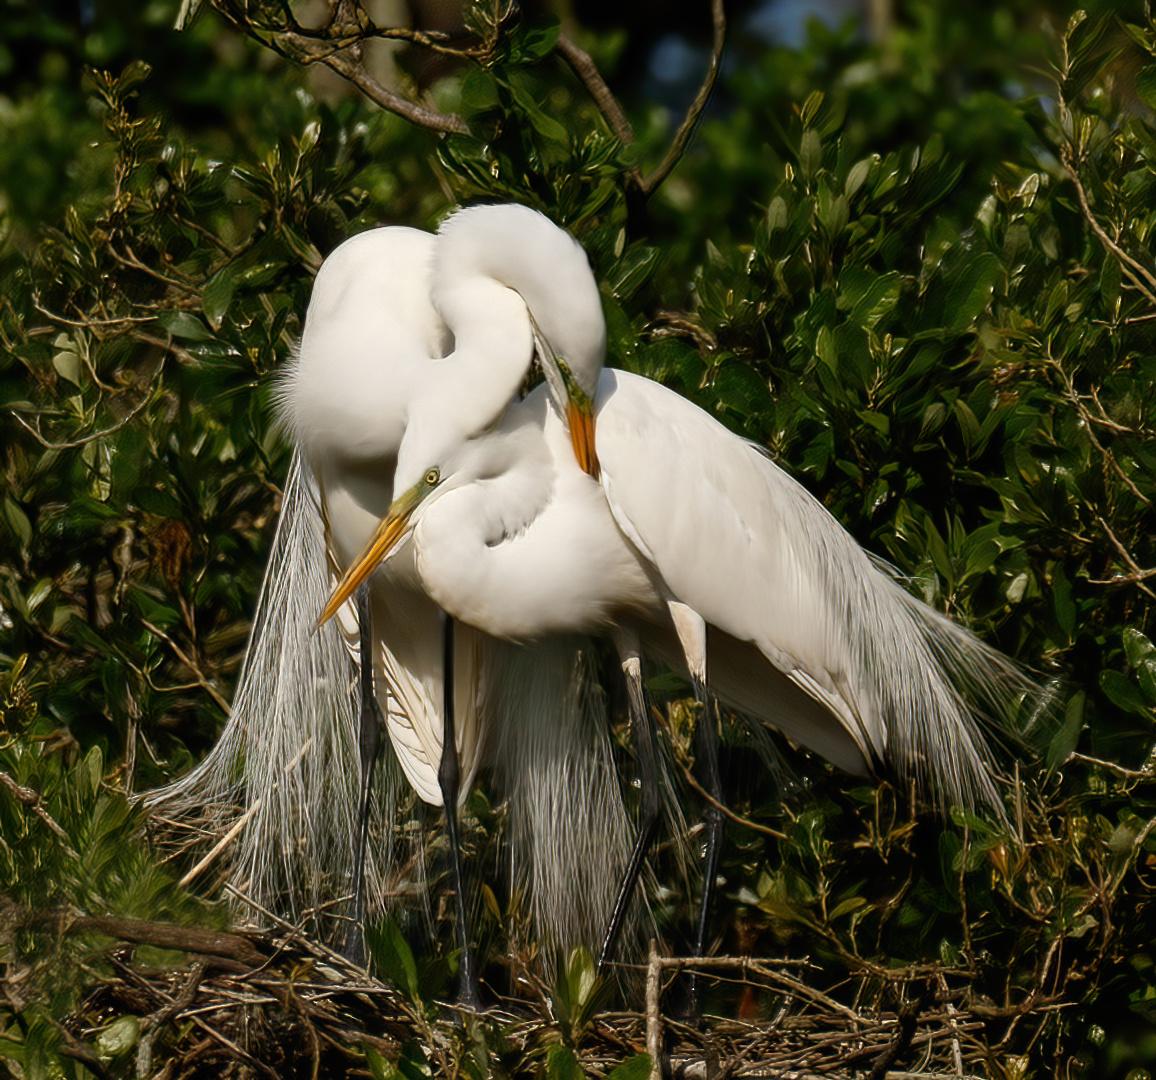 Competition entry: Great White Egrets Snuggling In Mating Season